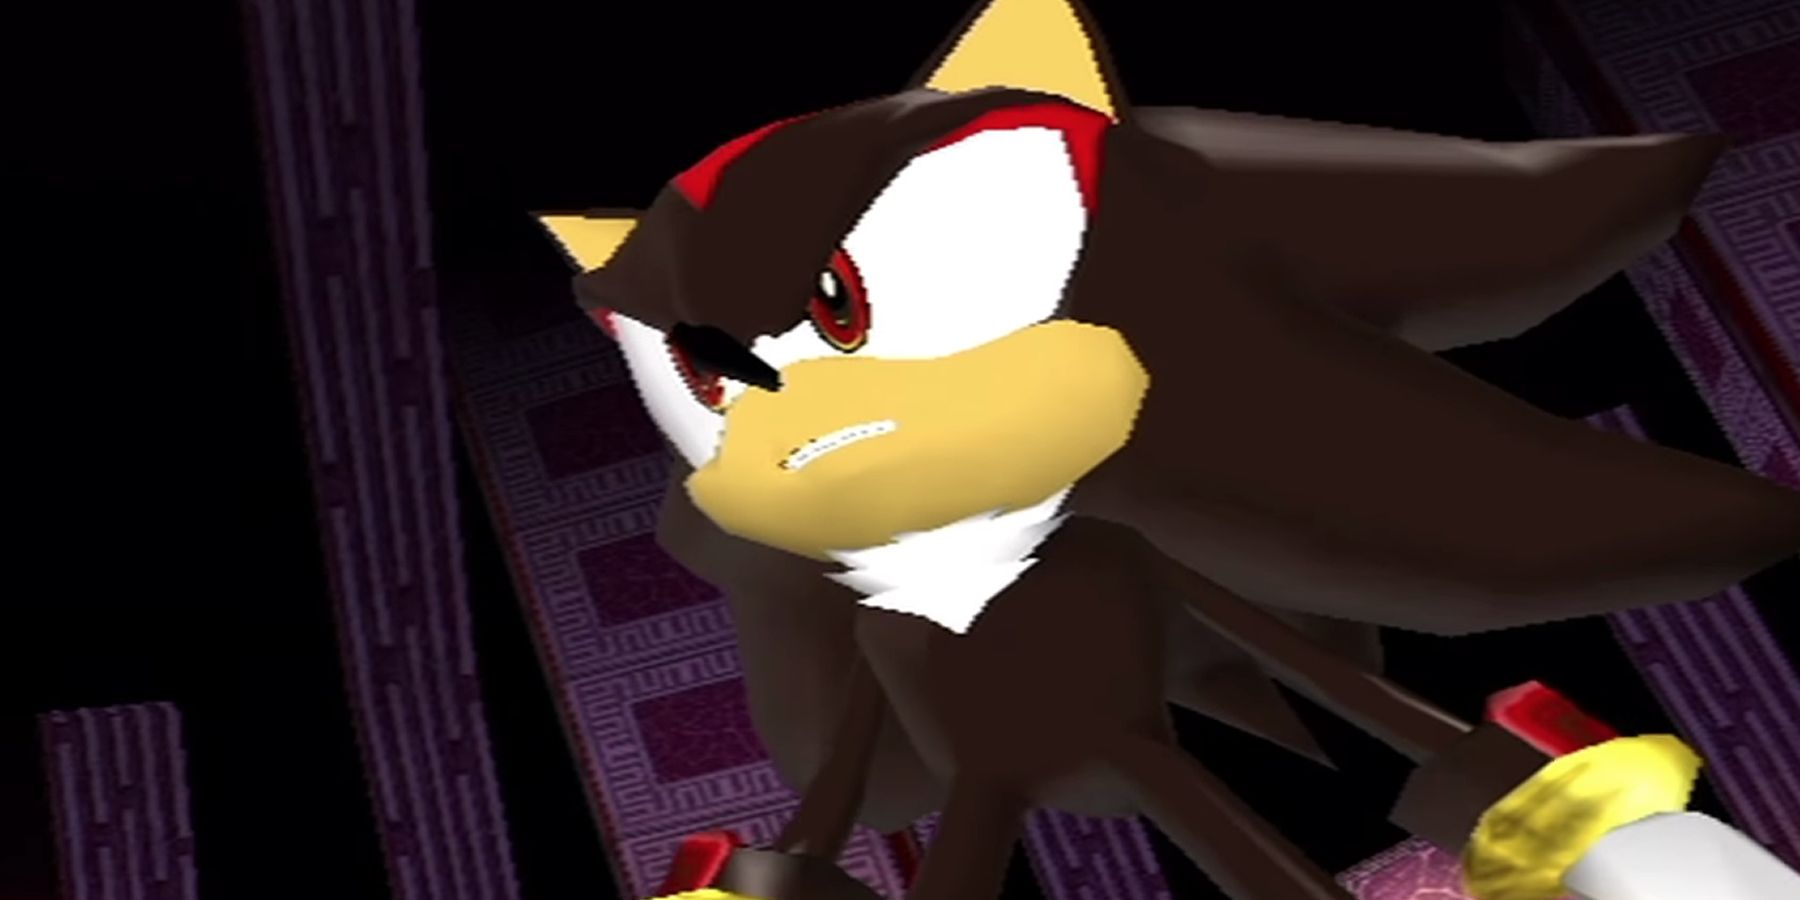 Shadow the Hedgehog is in the next Sonic movie and all I can think